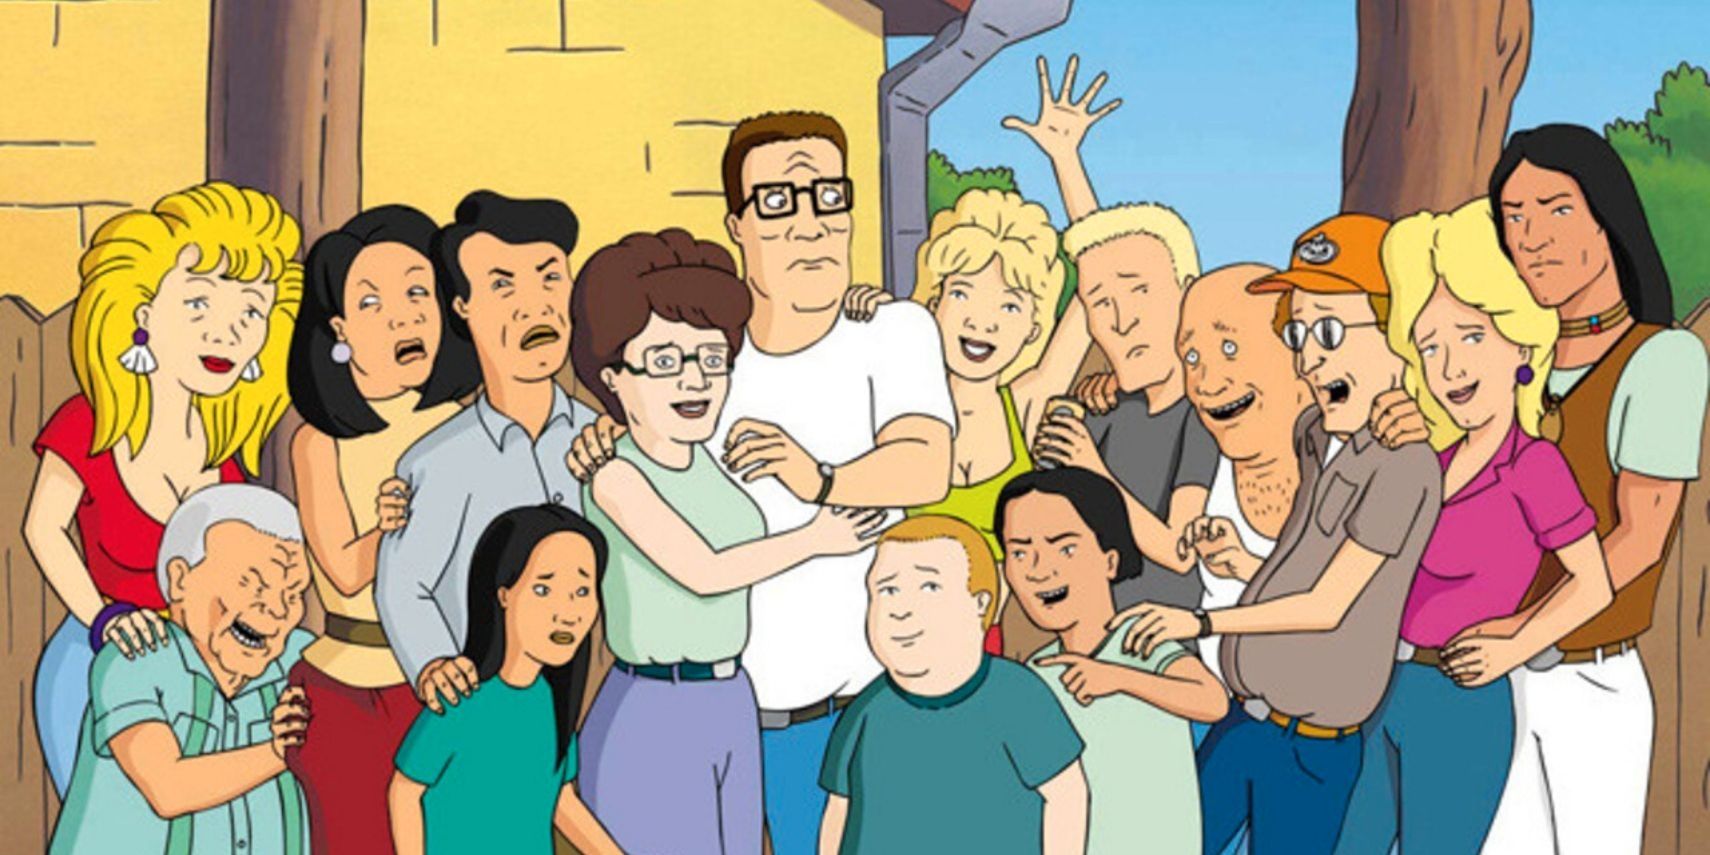 The cast of King of the Hill together at the fence